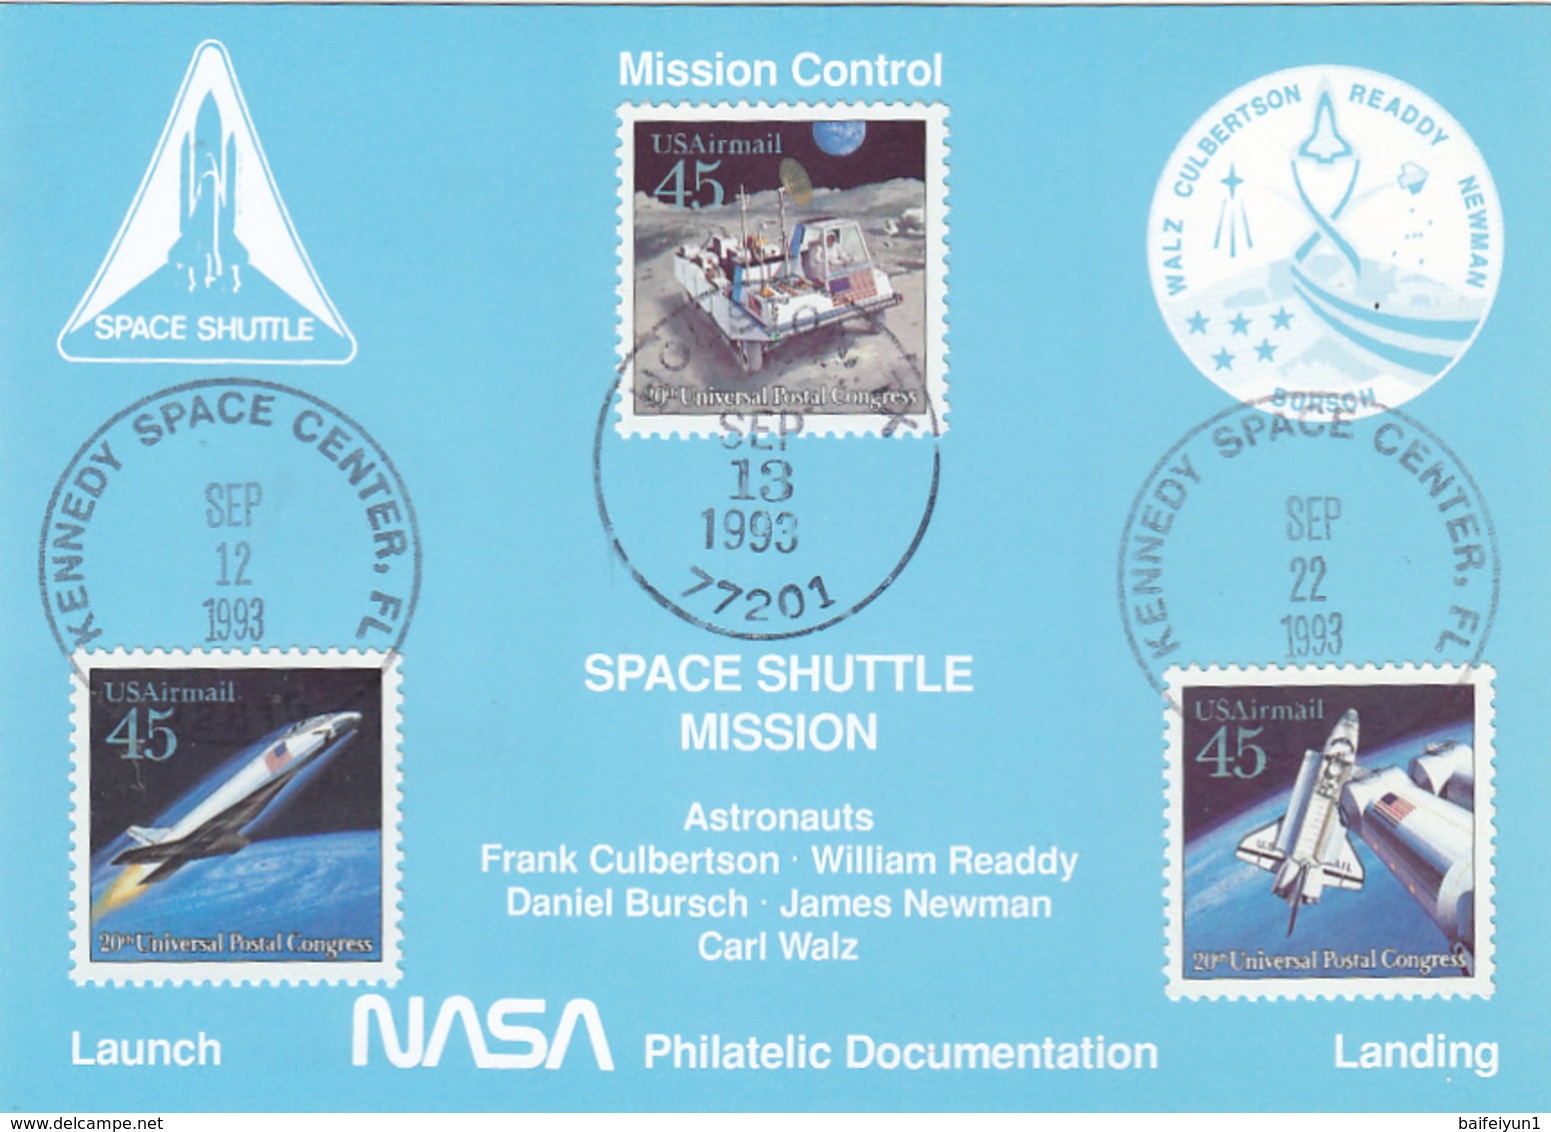 1993 USA Space Shuttle Discovery STS-51 Postal Card - América Del Norte